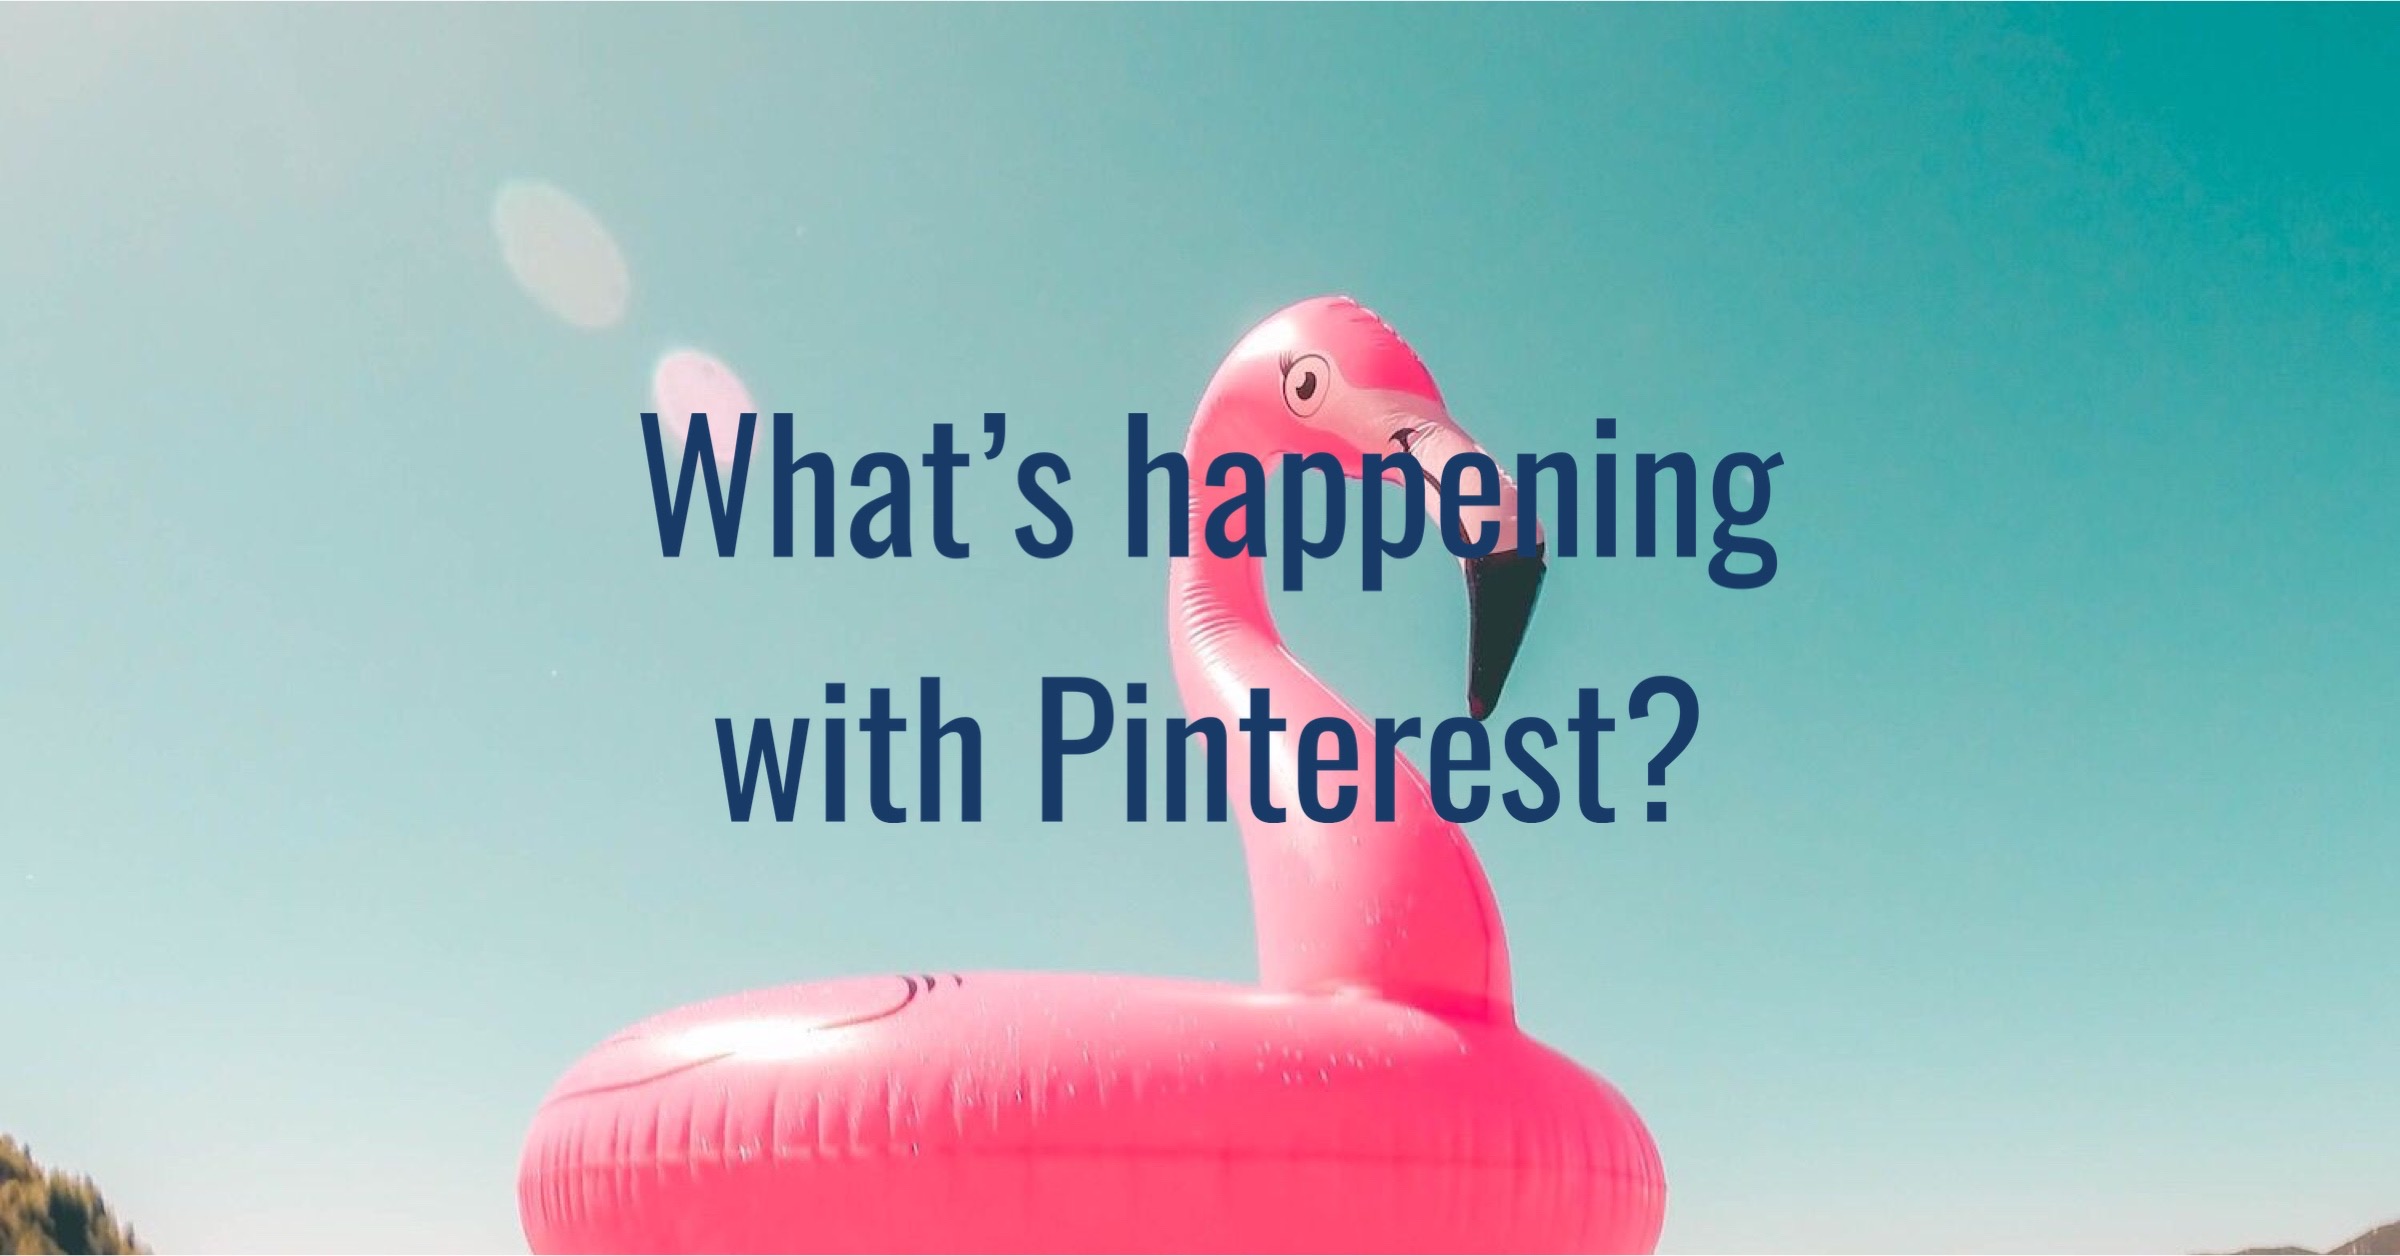 REUTERS: What is happening with Pinterest?